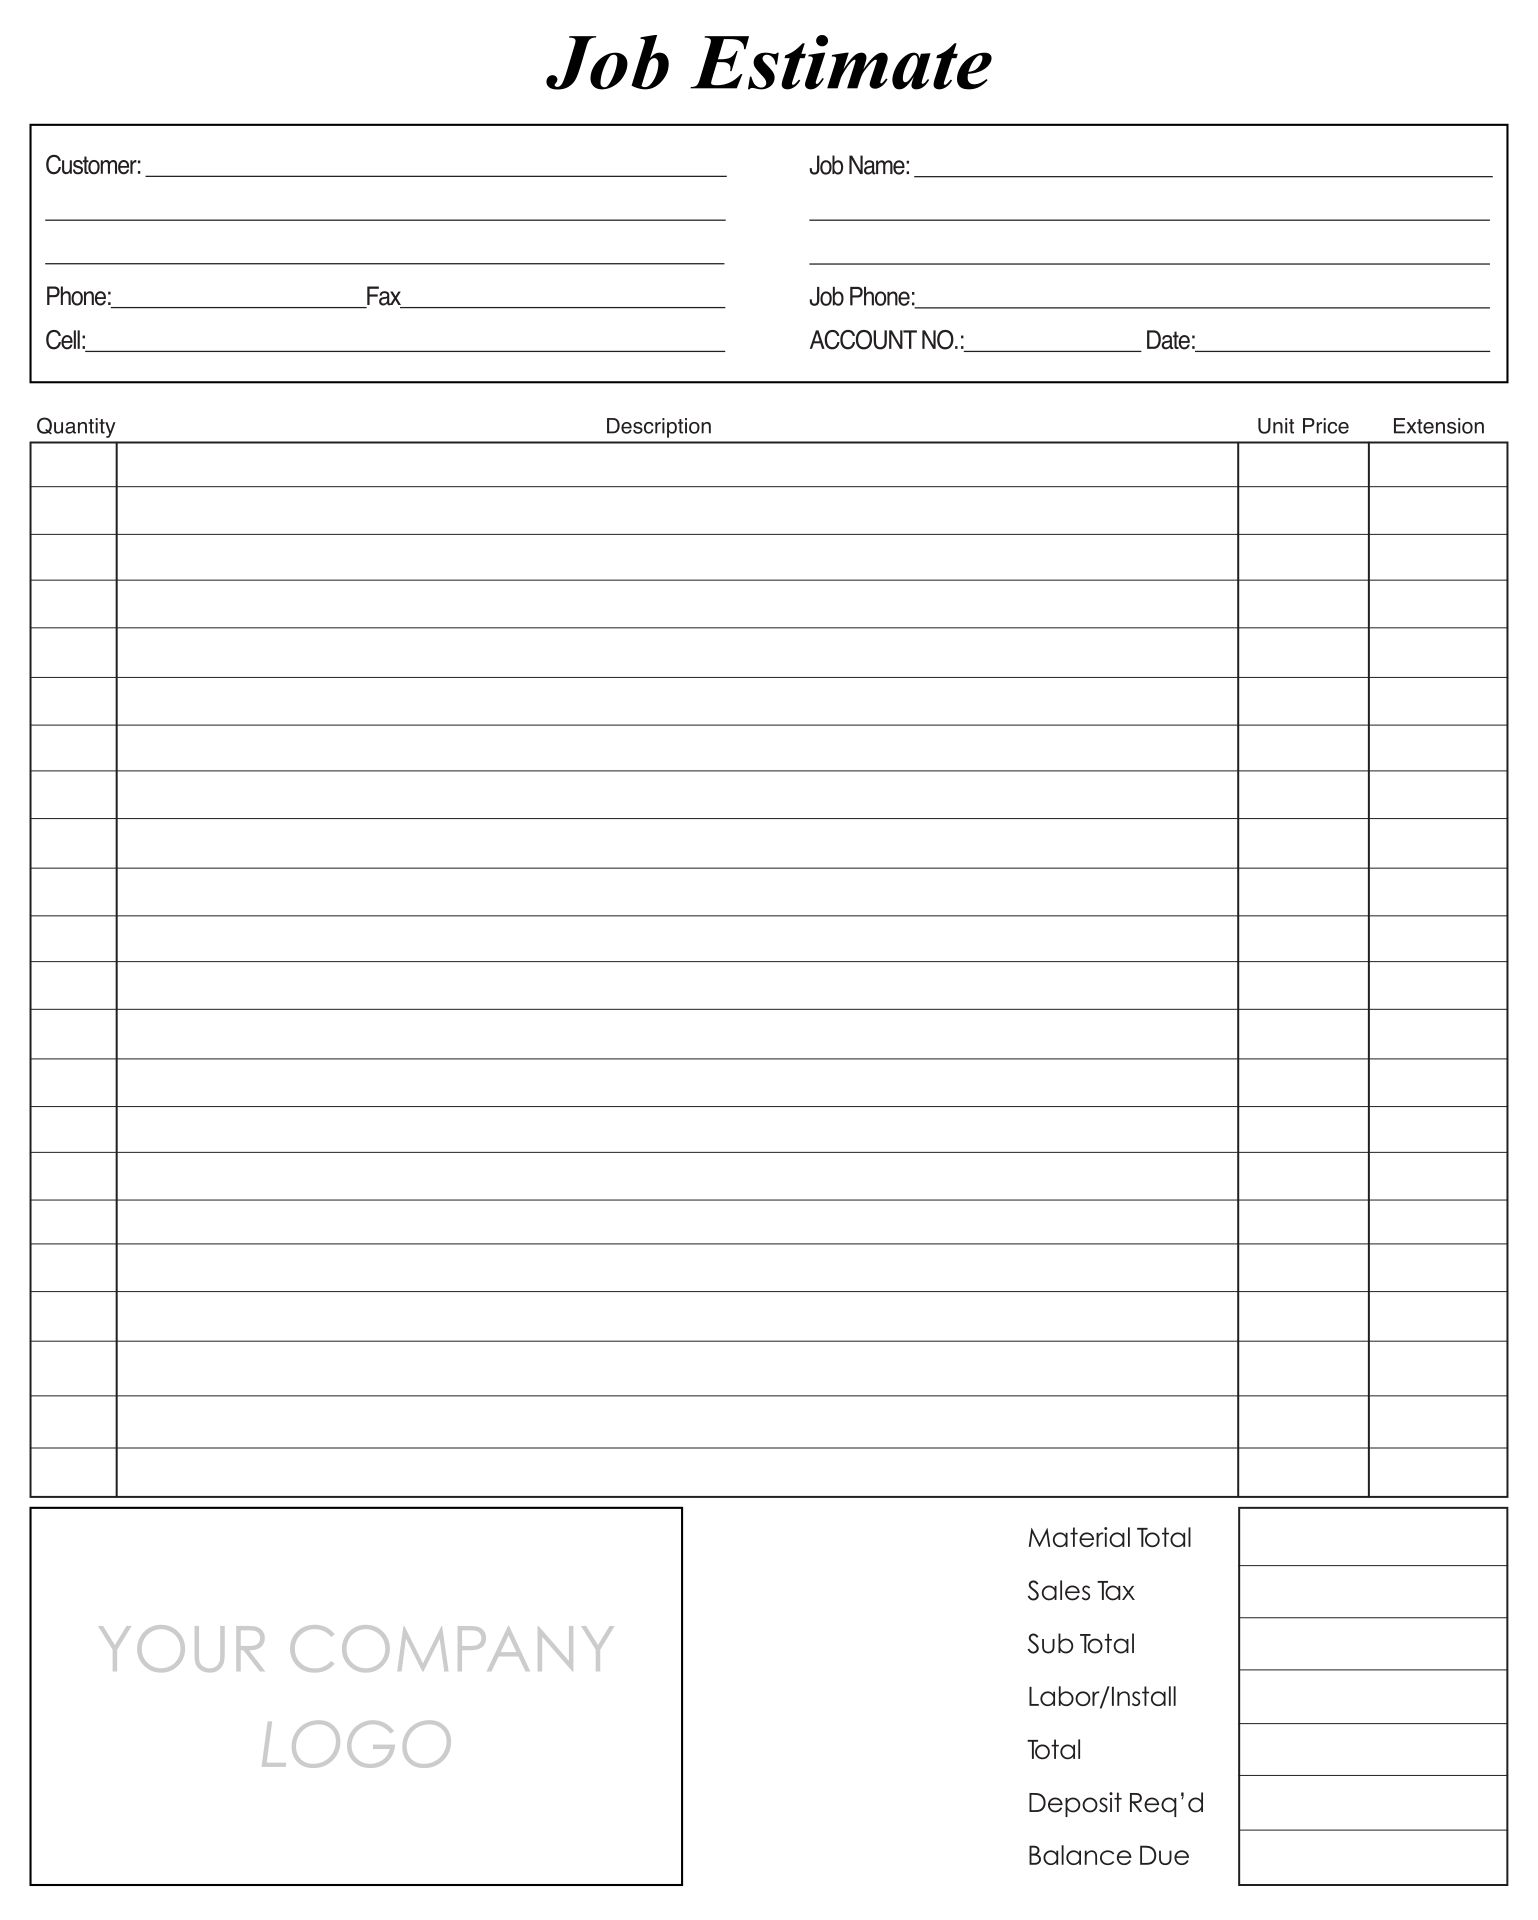 free roof proposal form